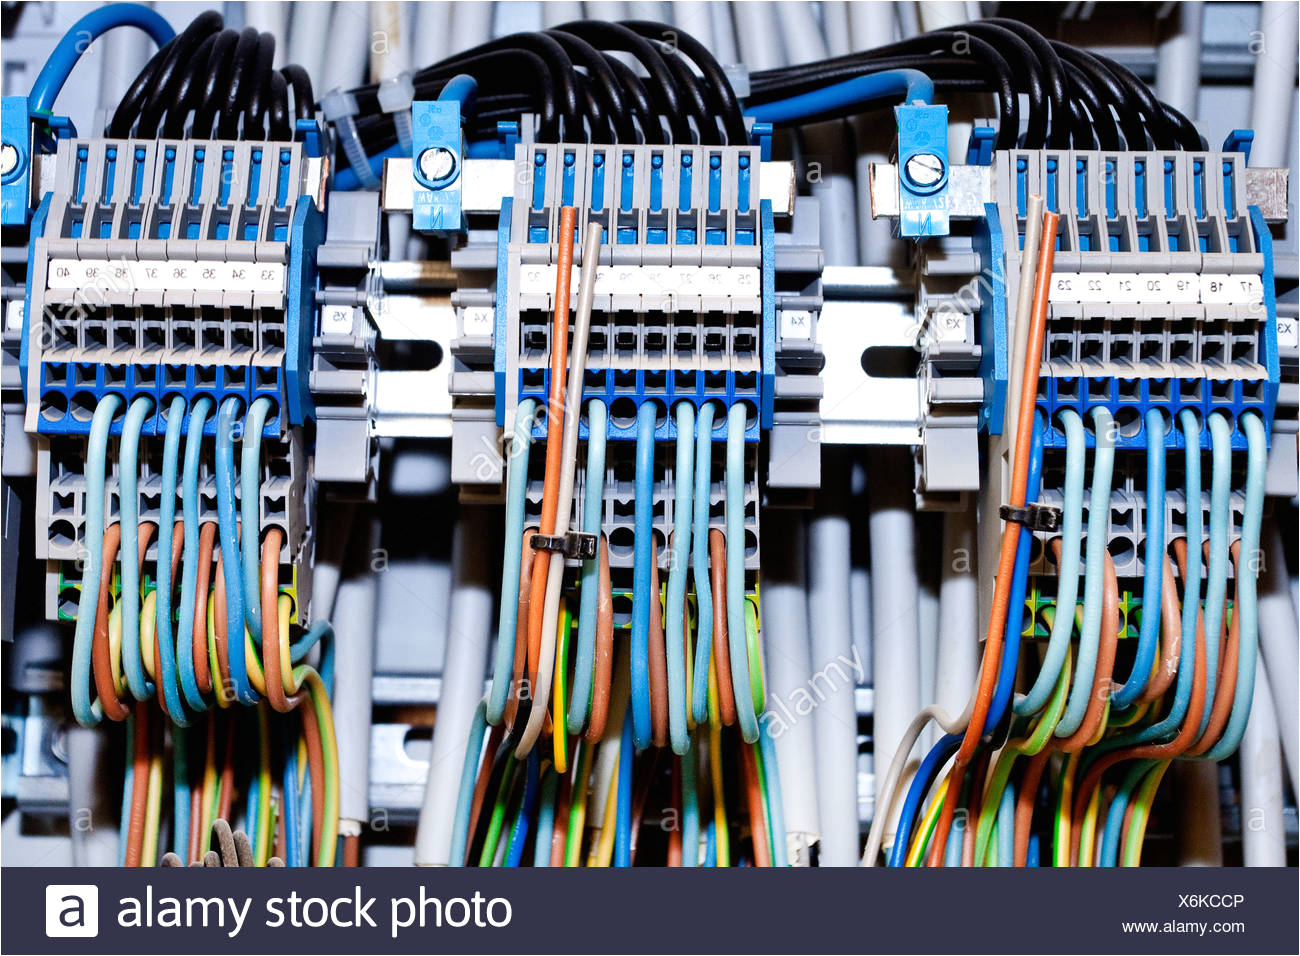 cables in an electrical distribution box stock image